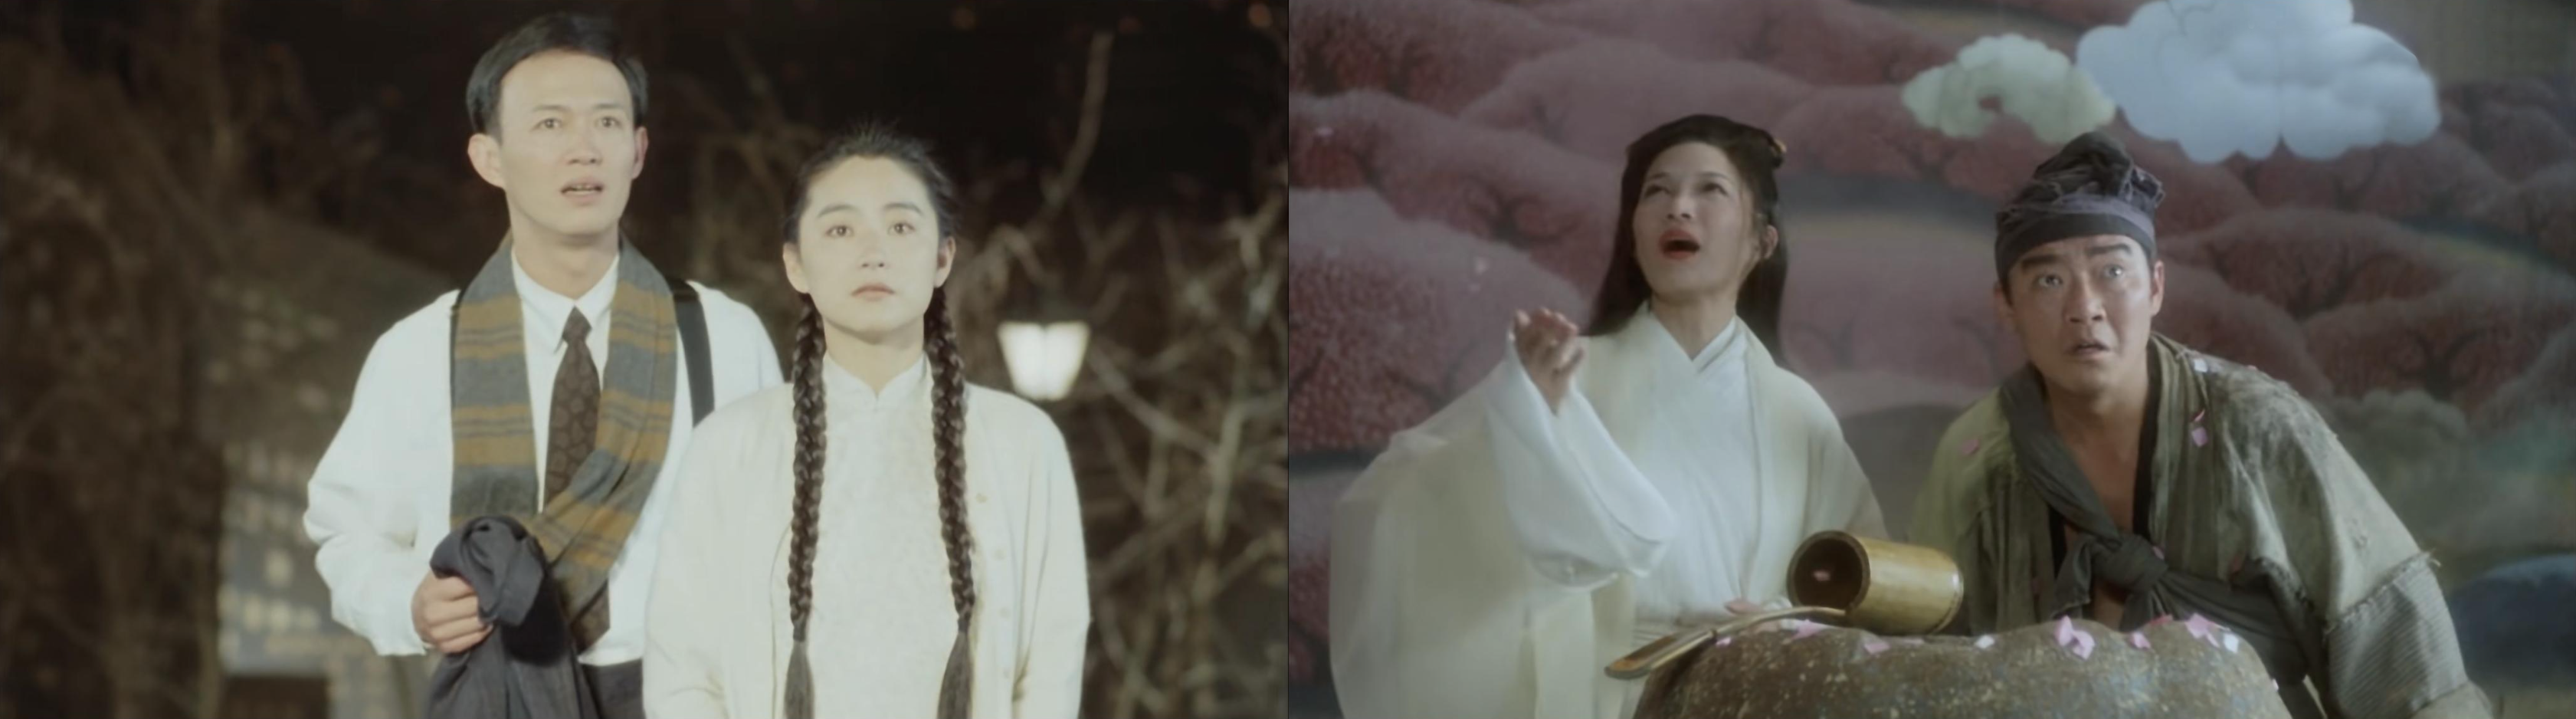 Still photos from the film production. Left: the young lovers Chiany Pin-Liu (Shih-Chieh King) and Yun Zhifau (Brigitte Lin). Right: Spring Flower (Ismene Ting) and Old Tao (Li-Chun Lee).